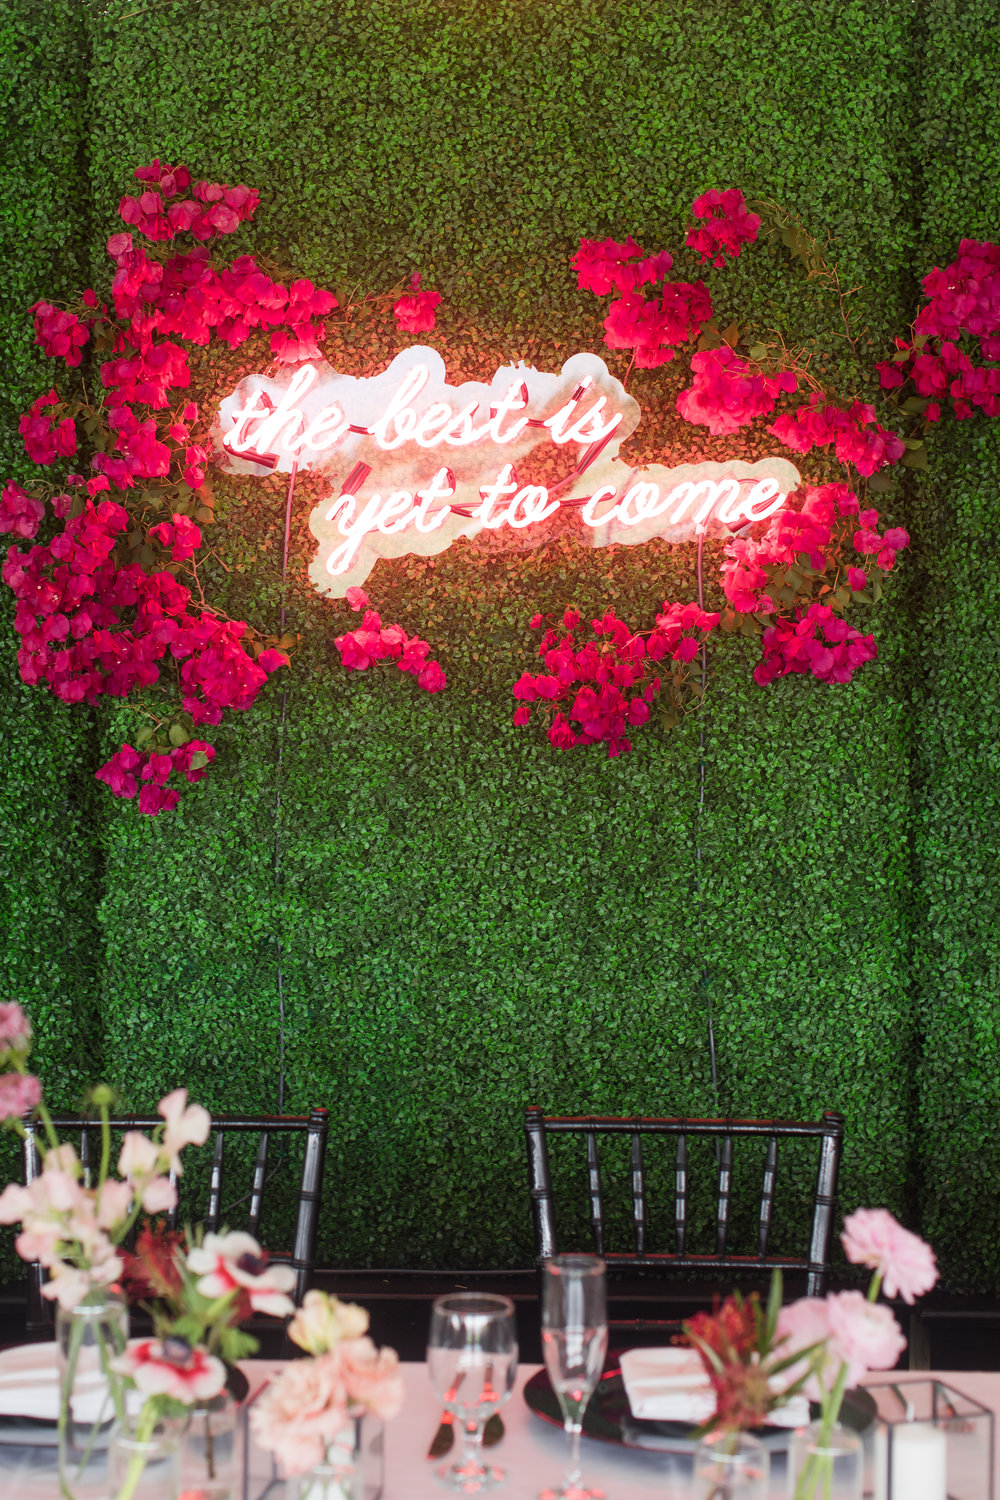 Because "The best is yet to come". Romantic neon sign lettering. With pink flowers it is the perfect accent to a green wall backdrop. // Fun and bright neon wedding sign decor ideas // mysweetengagement.com